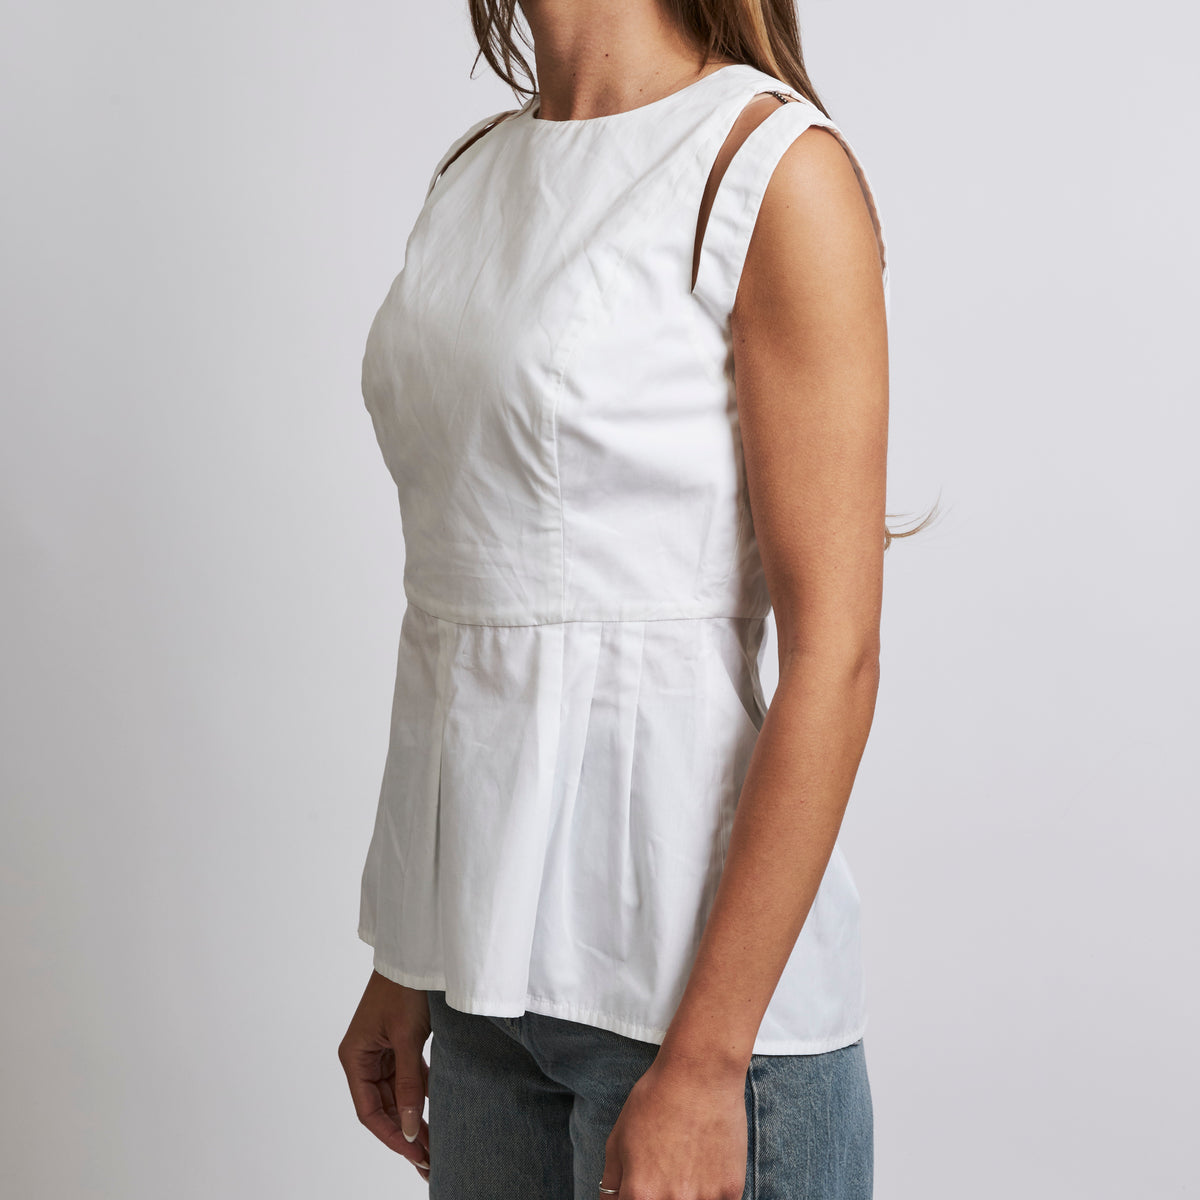 Excellent Pre-Loved White Cotton Sleeveless Peplum Top(side)